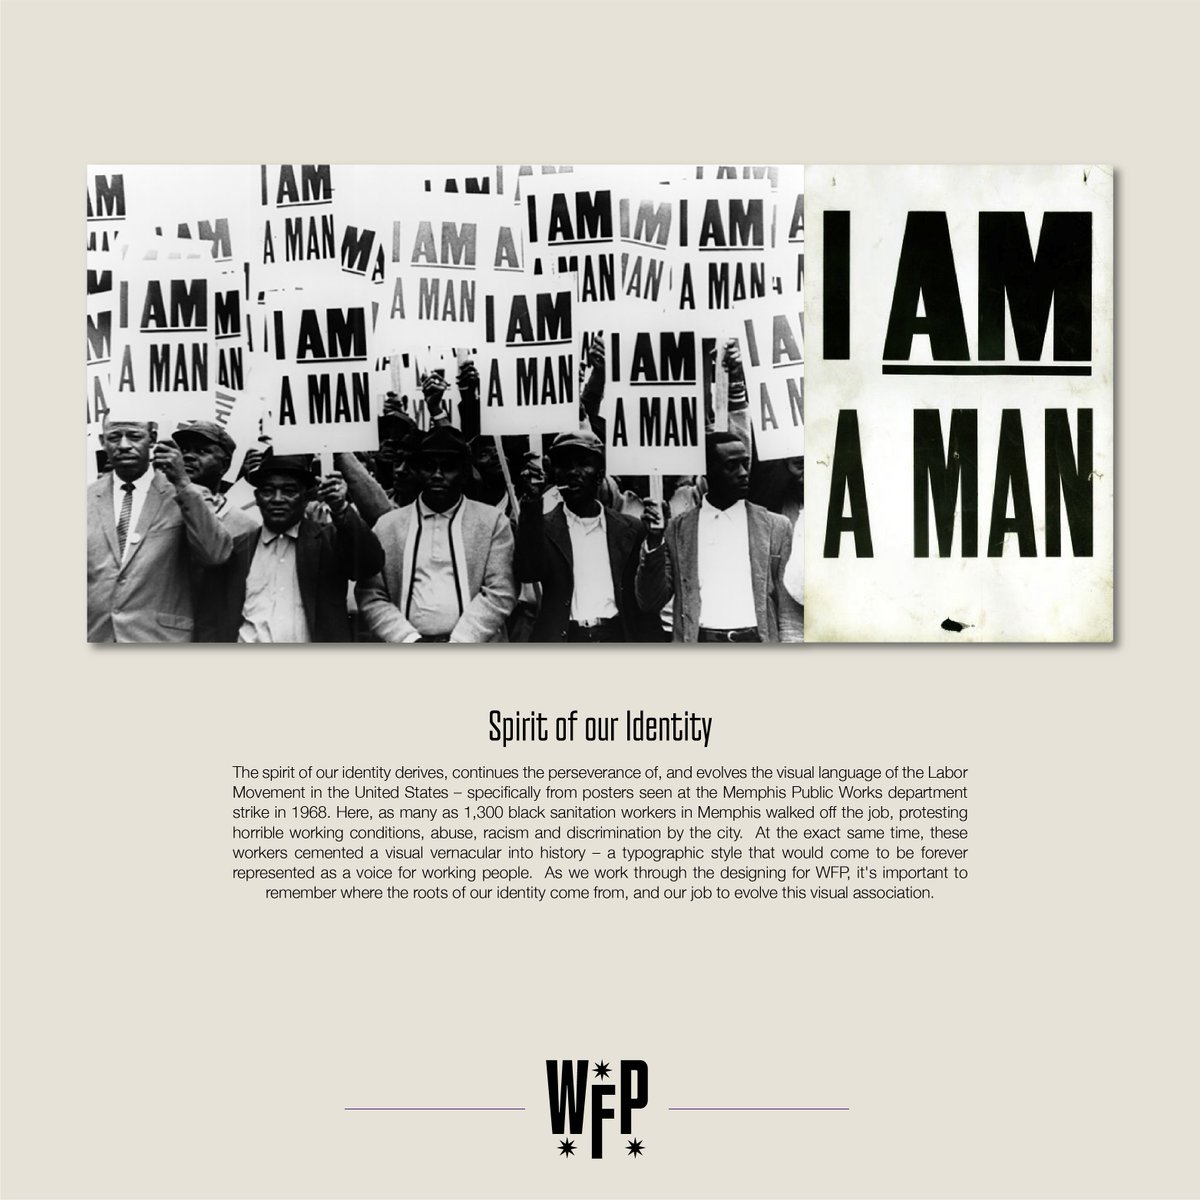 The font and wordmark are inspired by the "I AM A MAN" signs at the 1968 Memphis sanitation worker strike—and the boldness of the present day Black resistance that's transforming this country, forcing us to confront systemic racism, and fighting for economic justice.